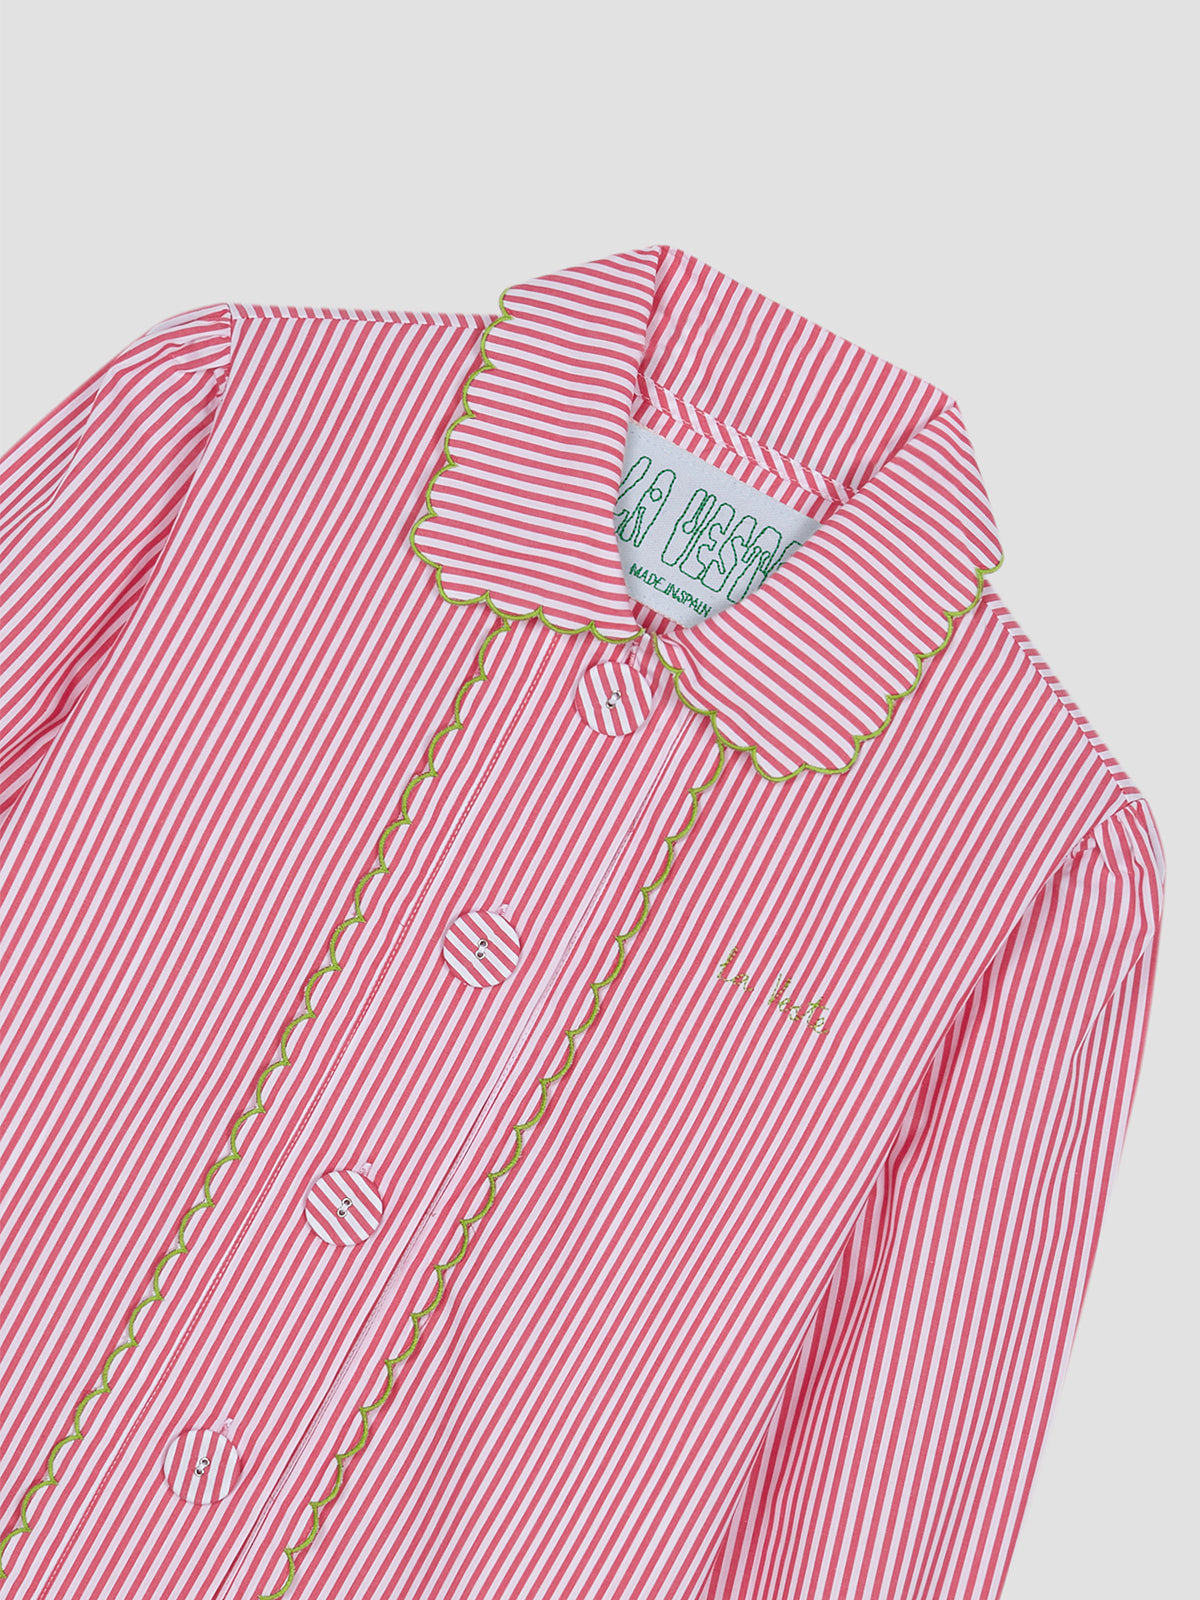 Shirt made of striped red cotton with lace details on the front, collar and cuffs.